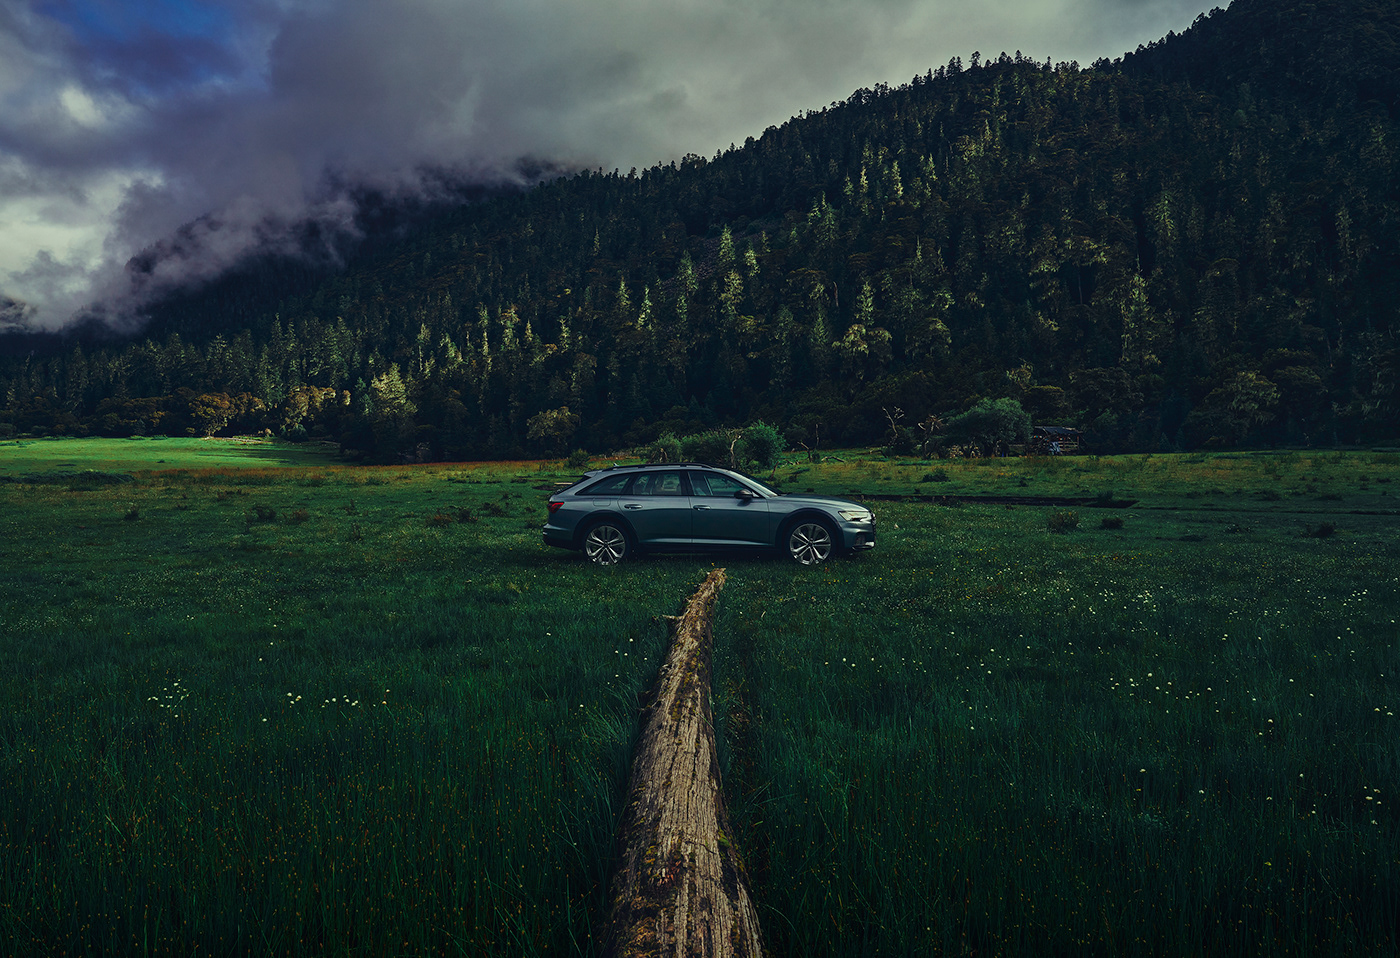 a6 a6allroad Audi automotive   BillyWu car green Nature Photography  quattro